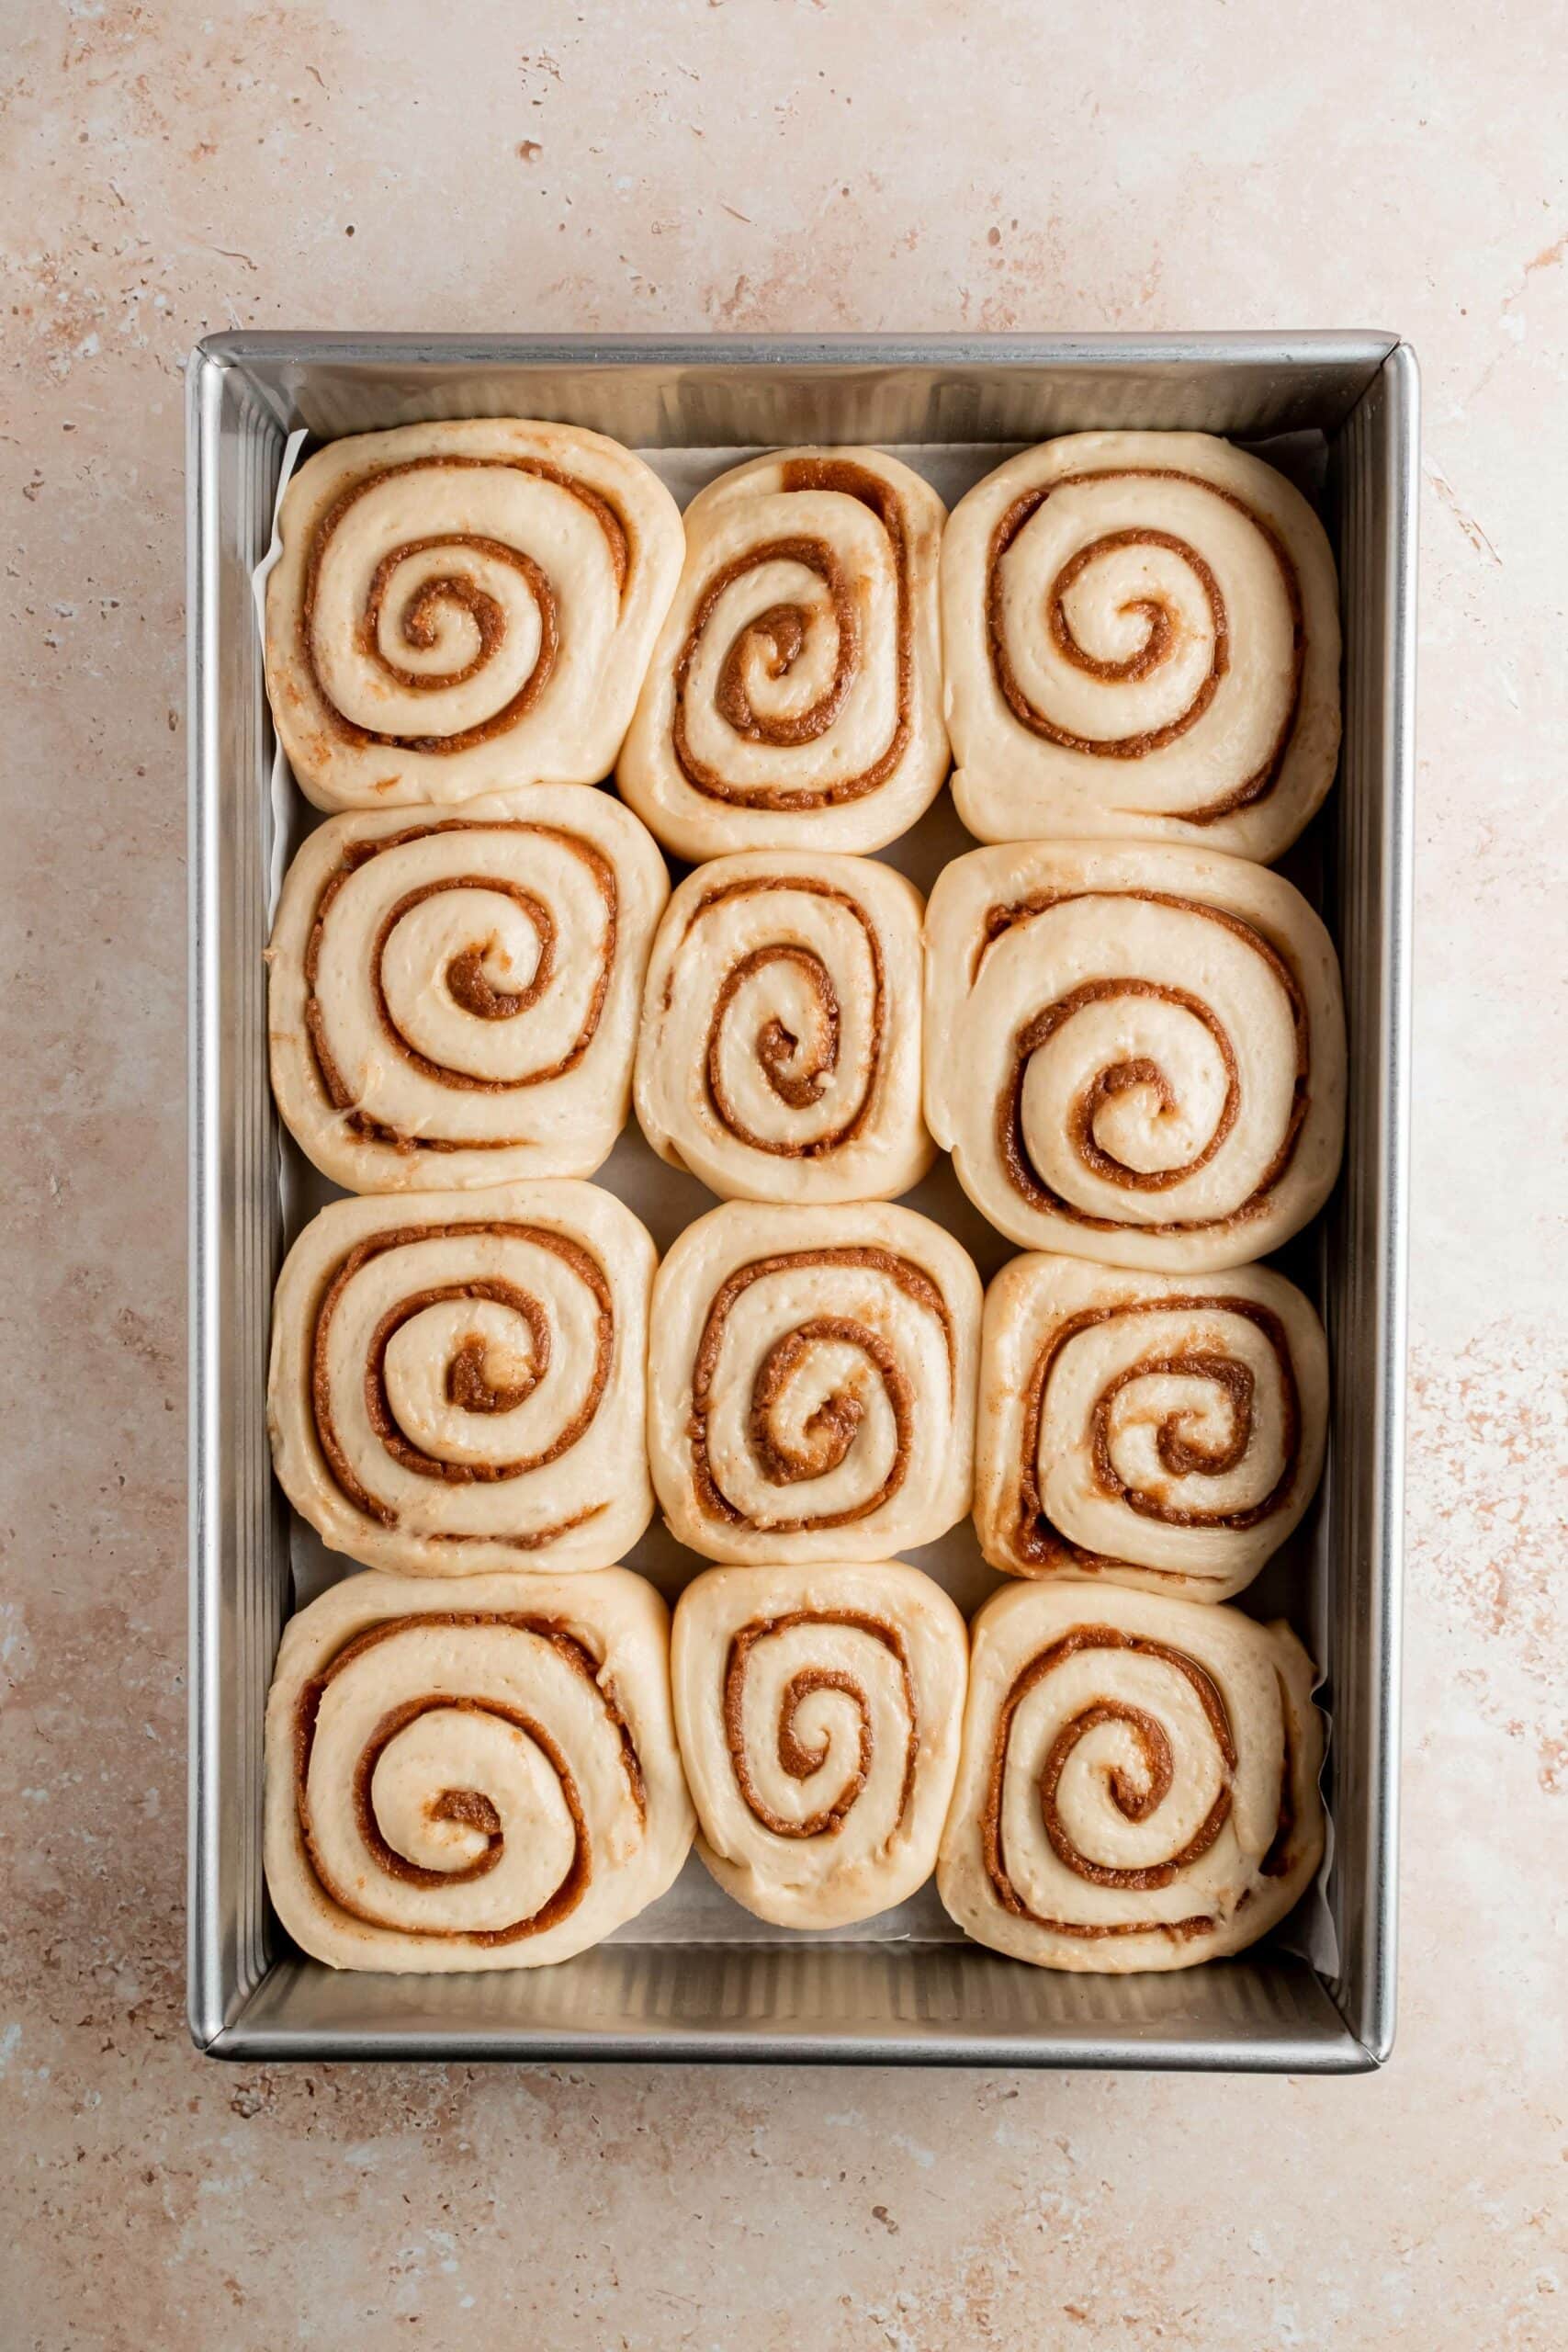 unbaked cinnamon rolls after final proof